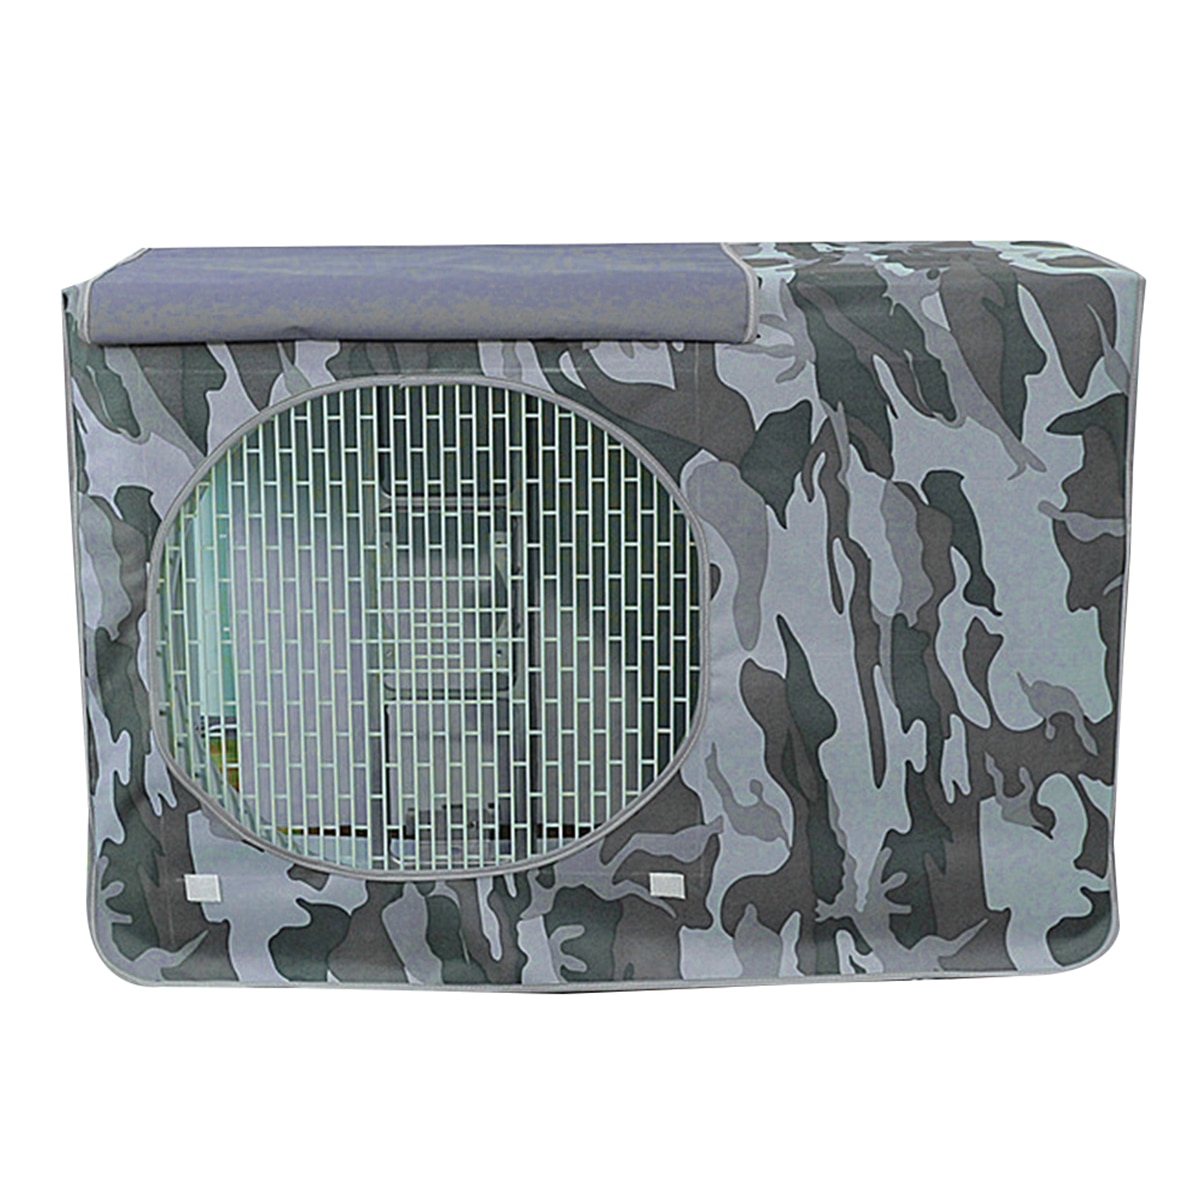 Airconditioner Cover Anti-Dust Outdoor Waterdichte Stofkap Airconditioner Unit Cover Zon Stofkap Stof Shield